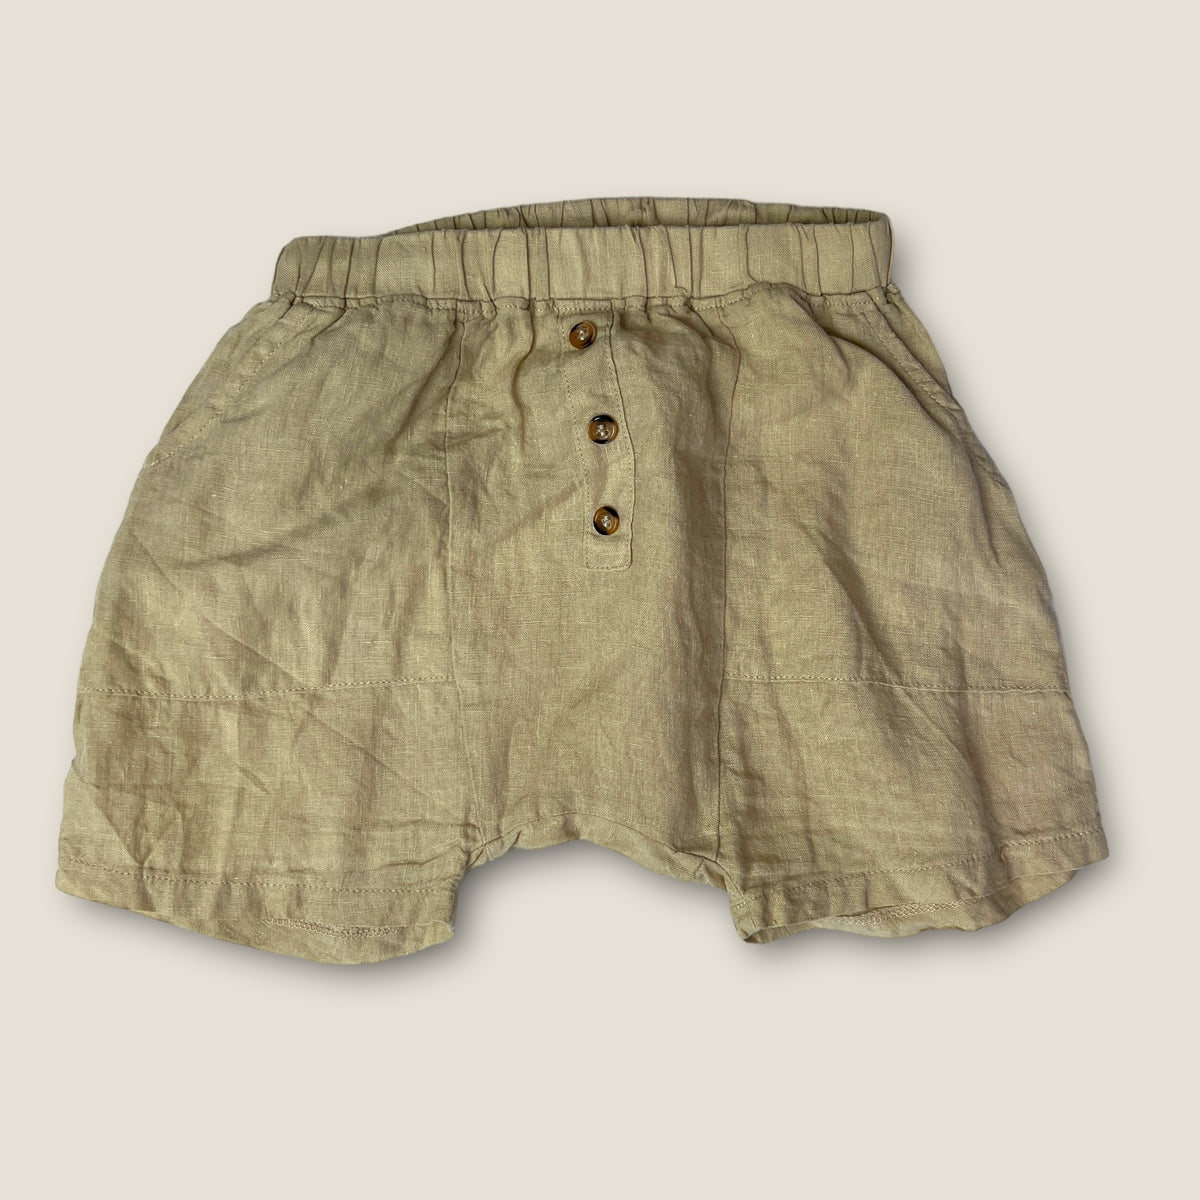 The Simple Folk Linen Shorts size 5-6 years